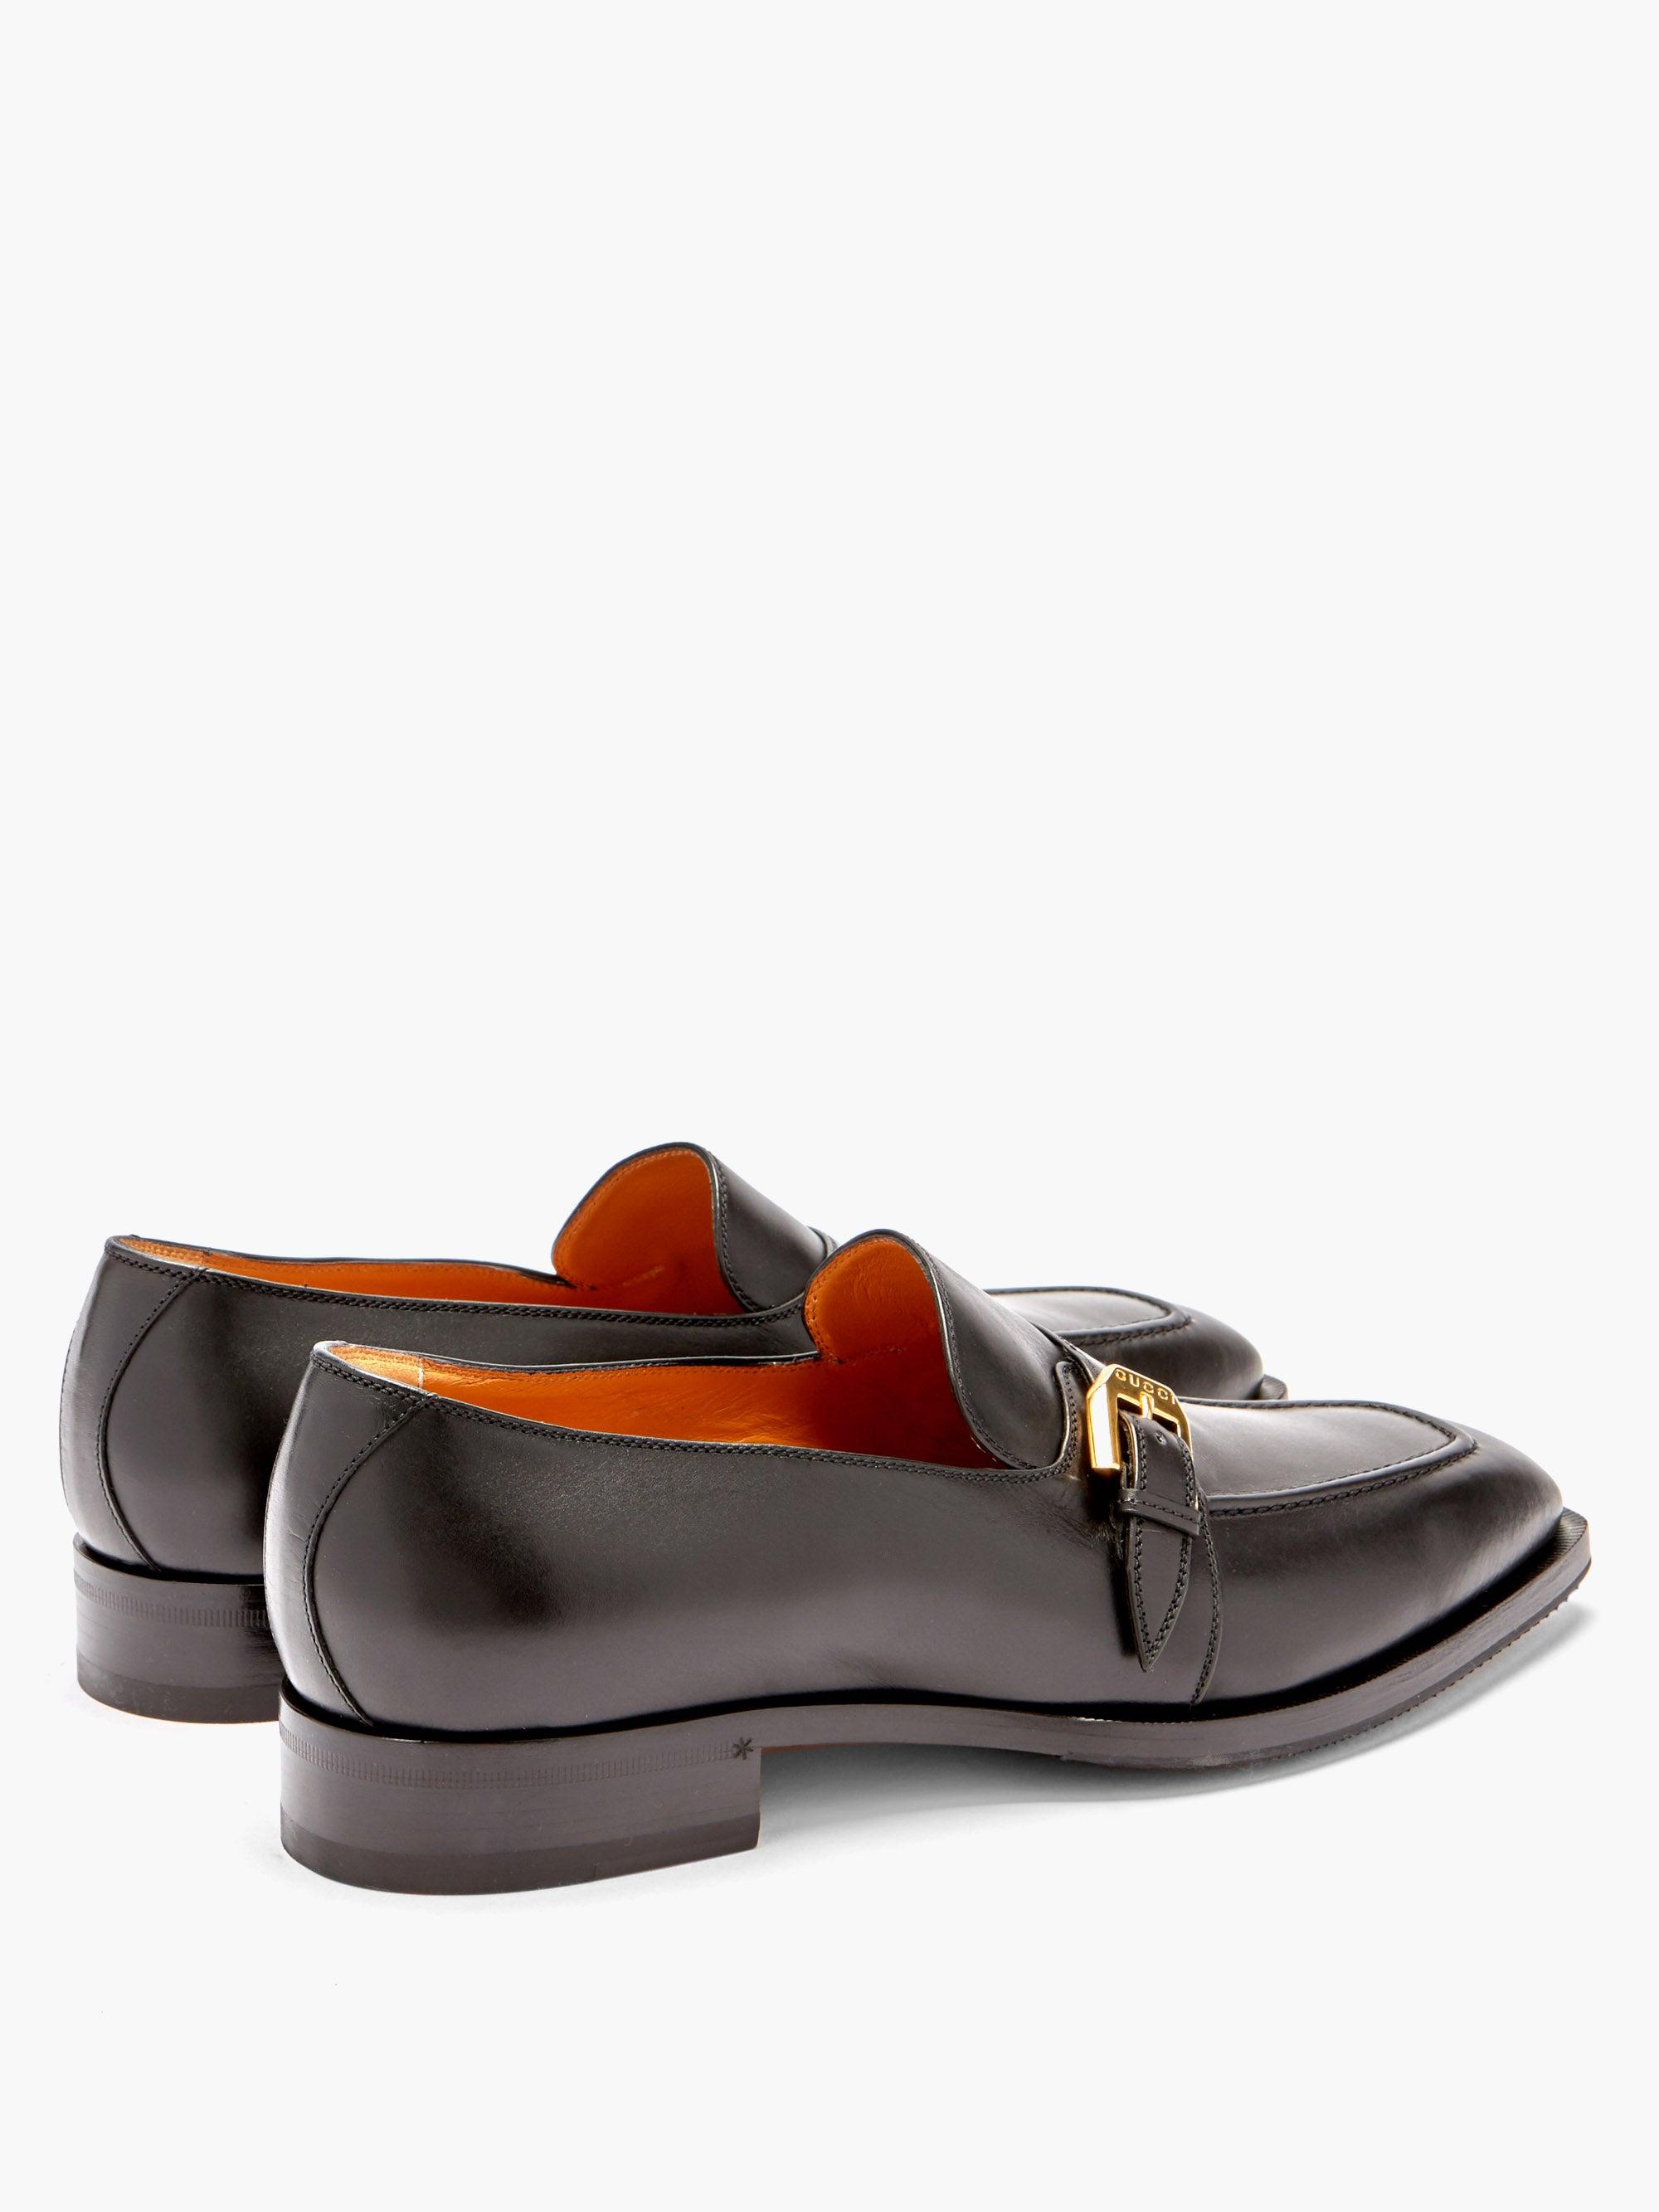 Gucci Zola Buckled Leather Loafers for Men | Lyst